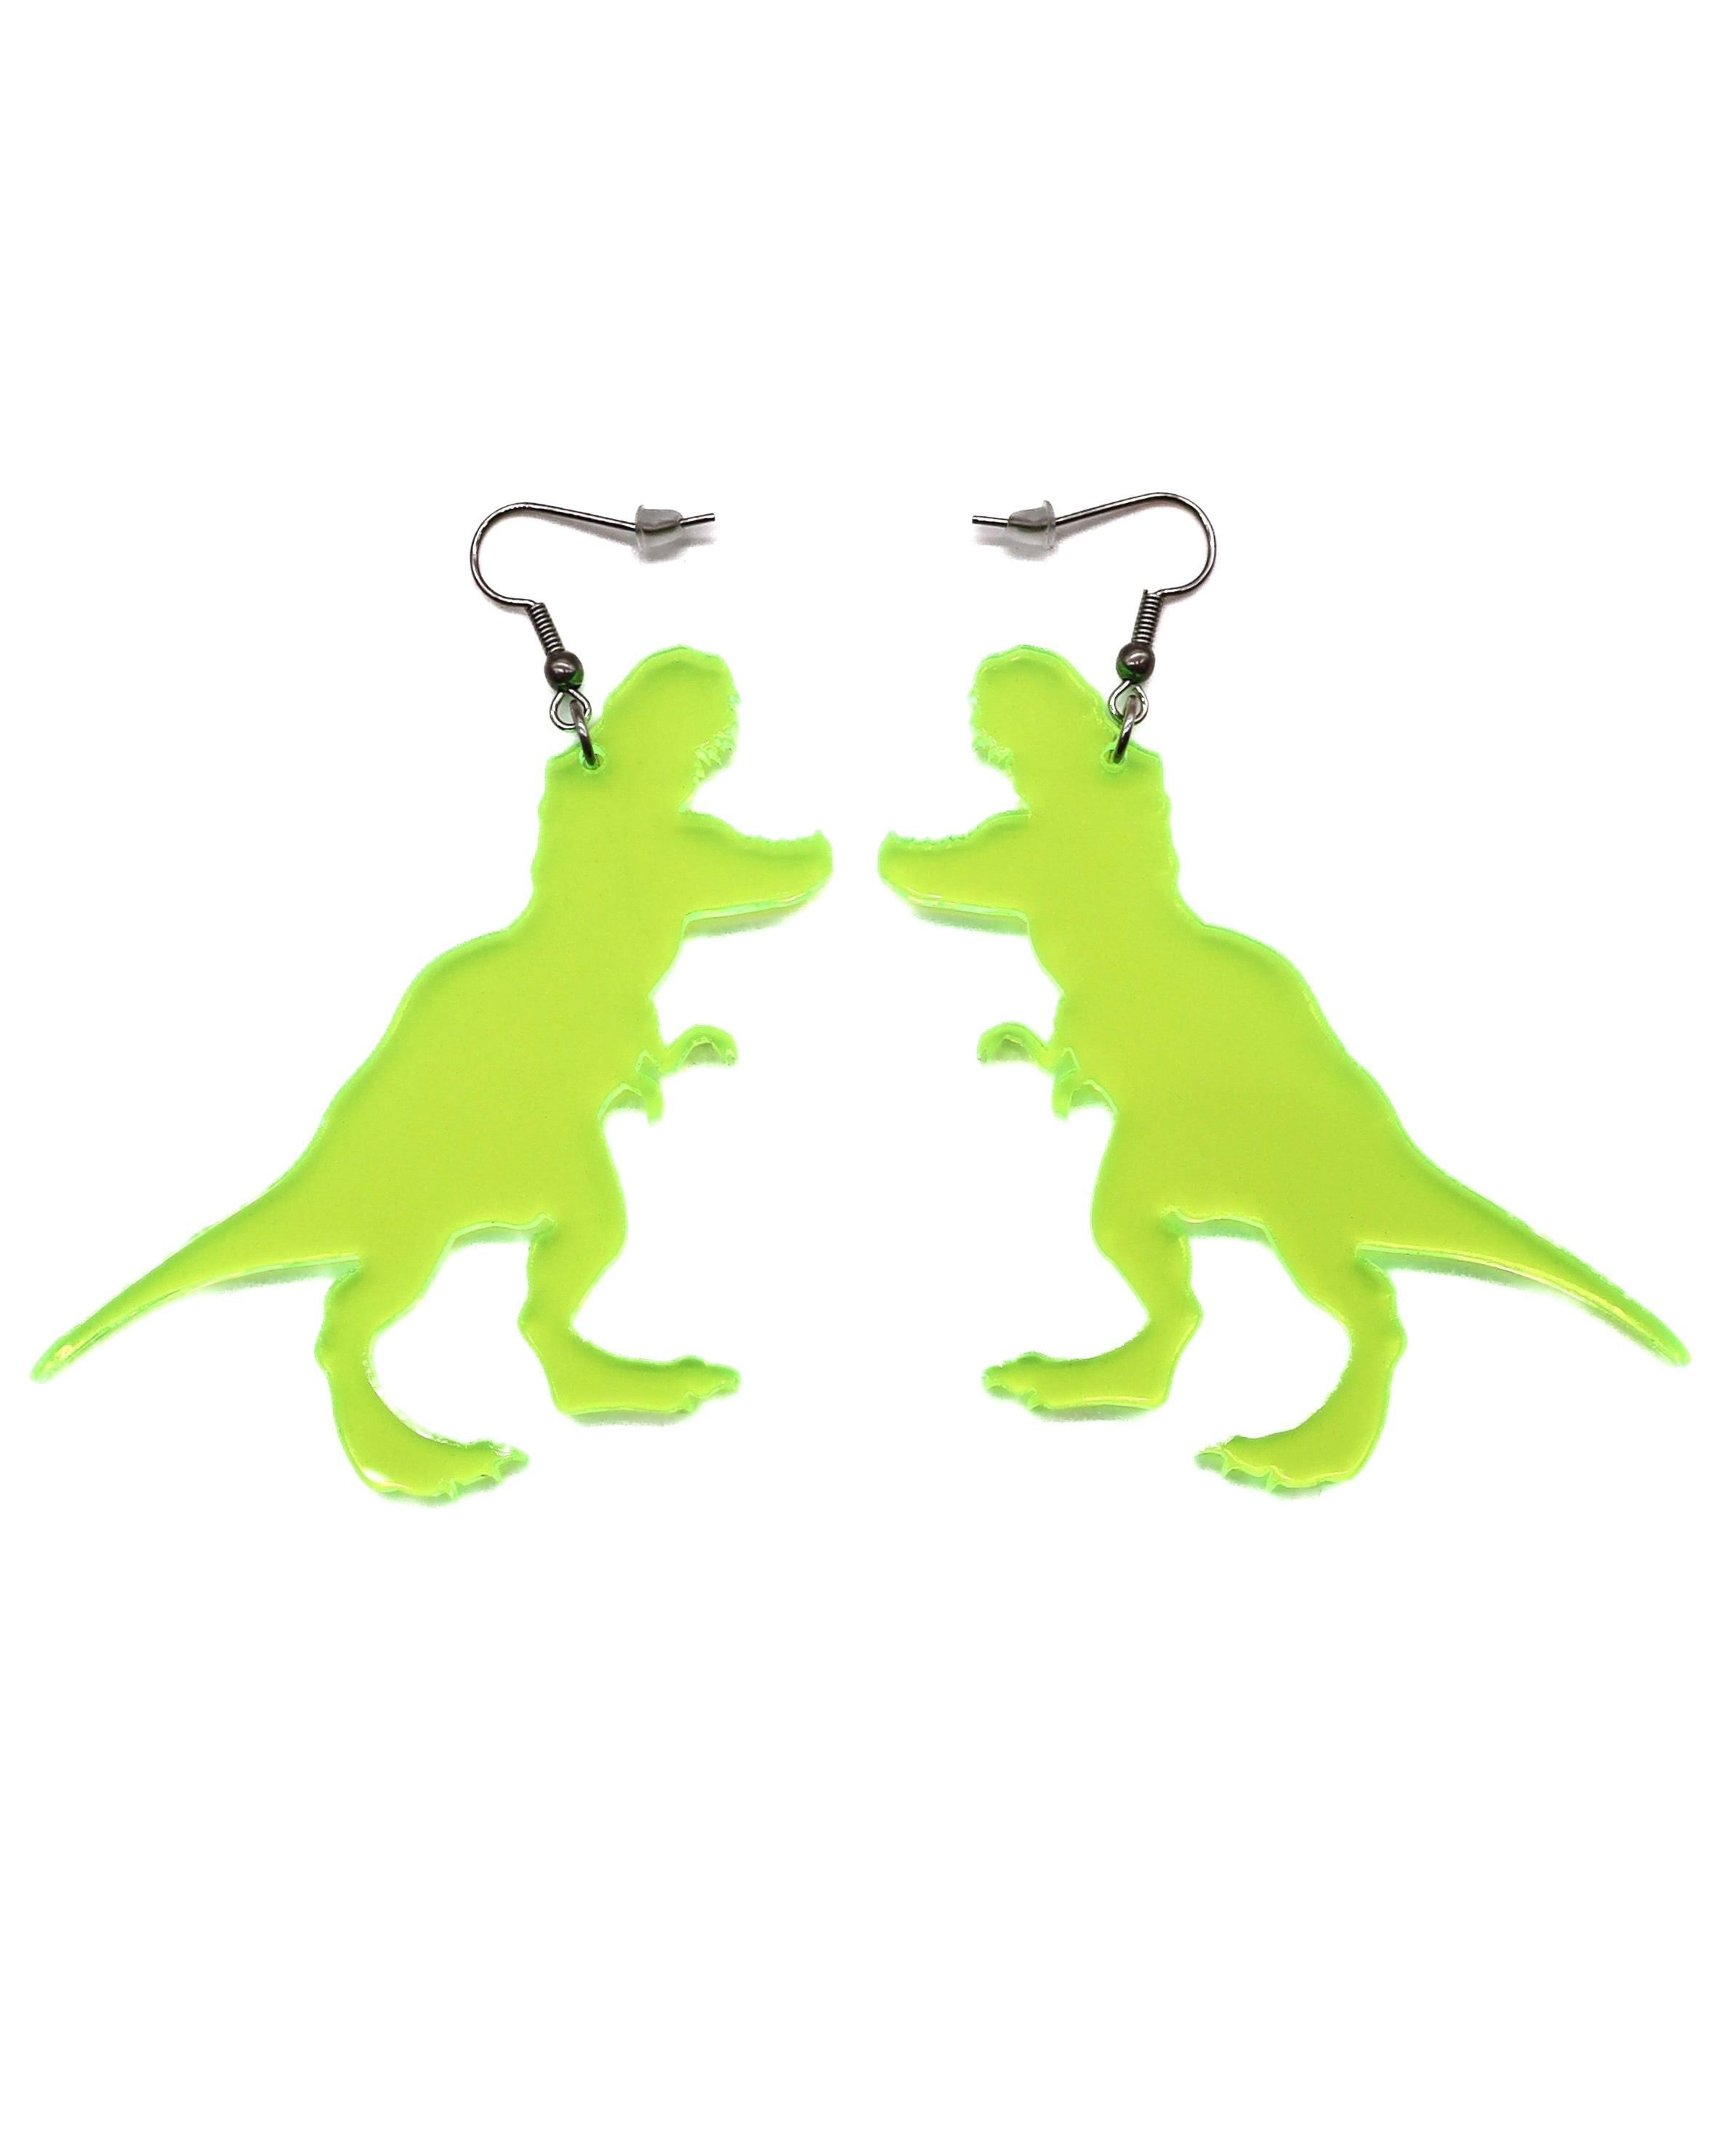 Close-up view of the T-Wrecked Earrings in fluorescent green.